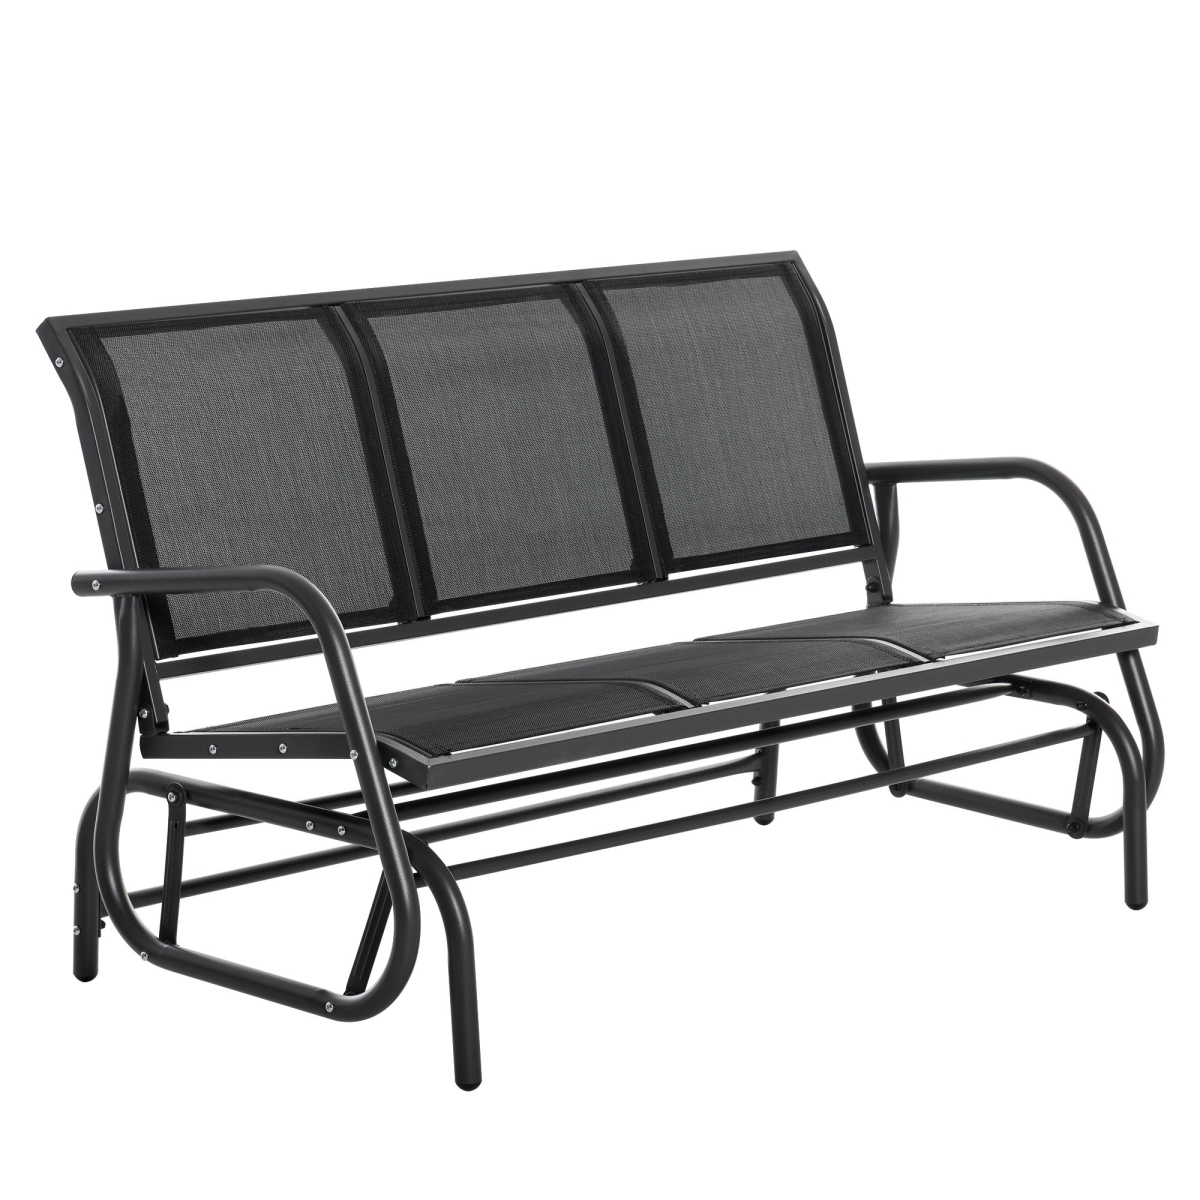 212 Main 84B-531 Outsunny 3-Person Outdoor Patio Glider Bench&#44; Porch Glider Swing with 3 Seats&#44; Breathable Mesh Fabric & Metal Fr